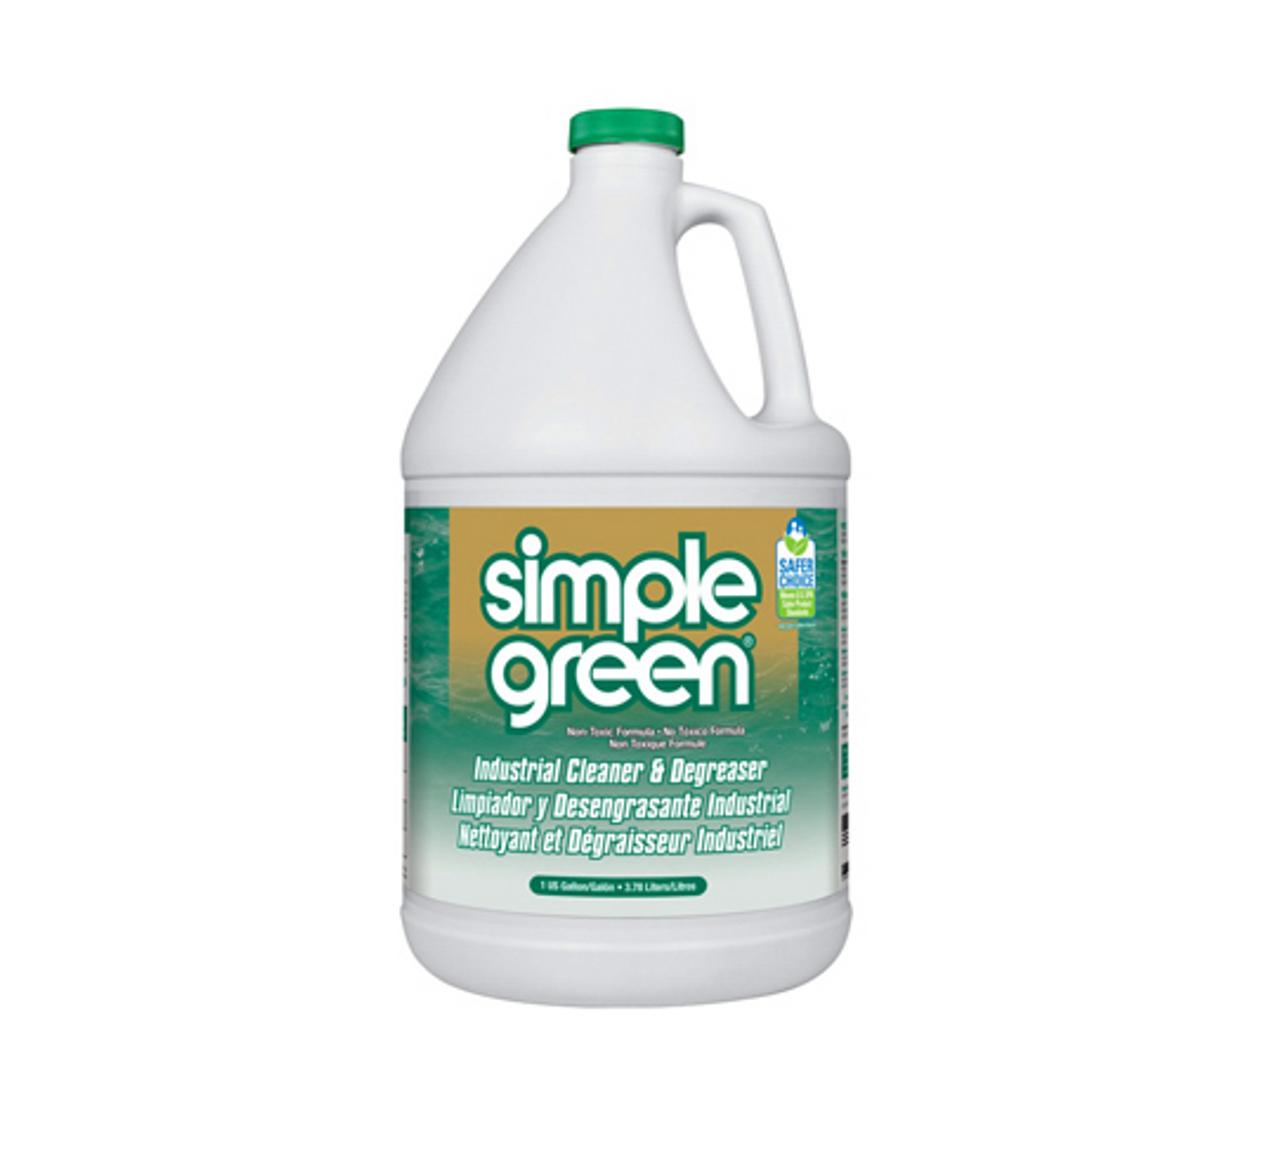 Twsting Green Cleaning Products, Method.